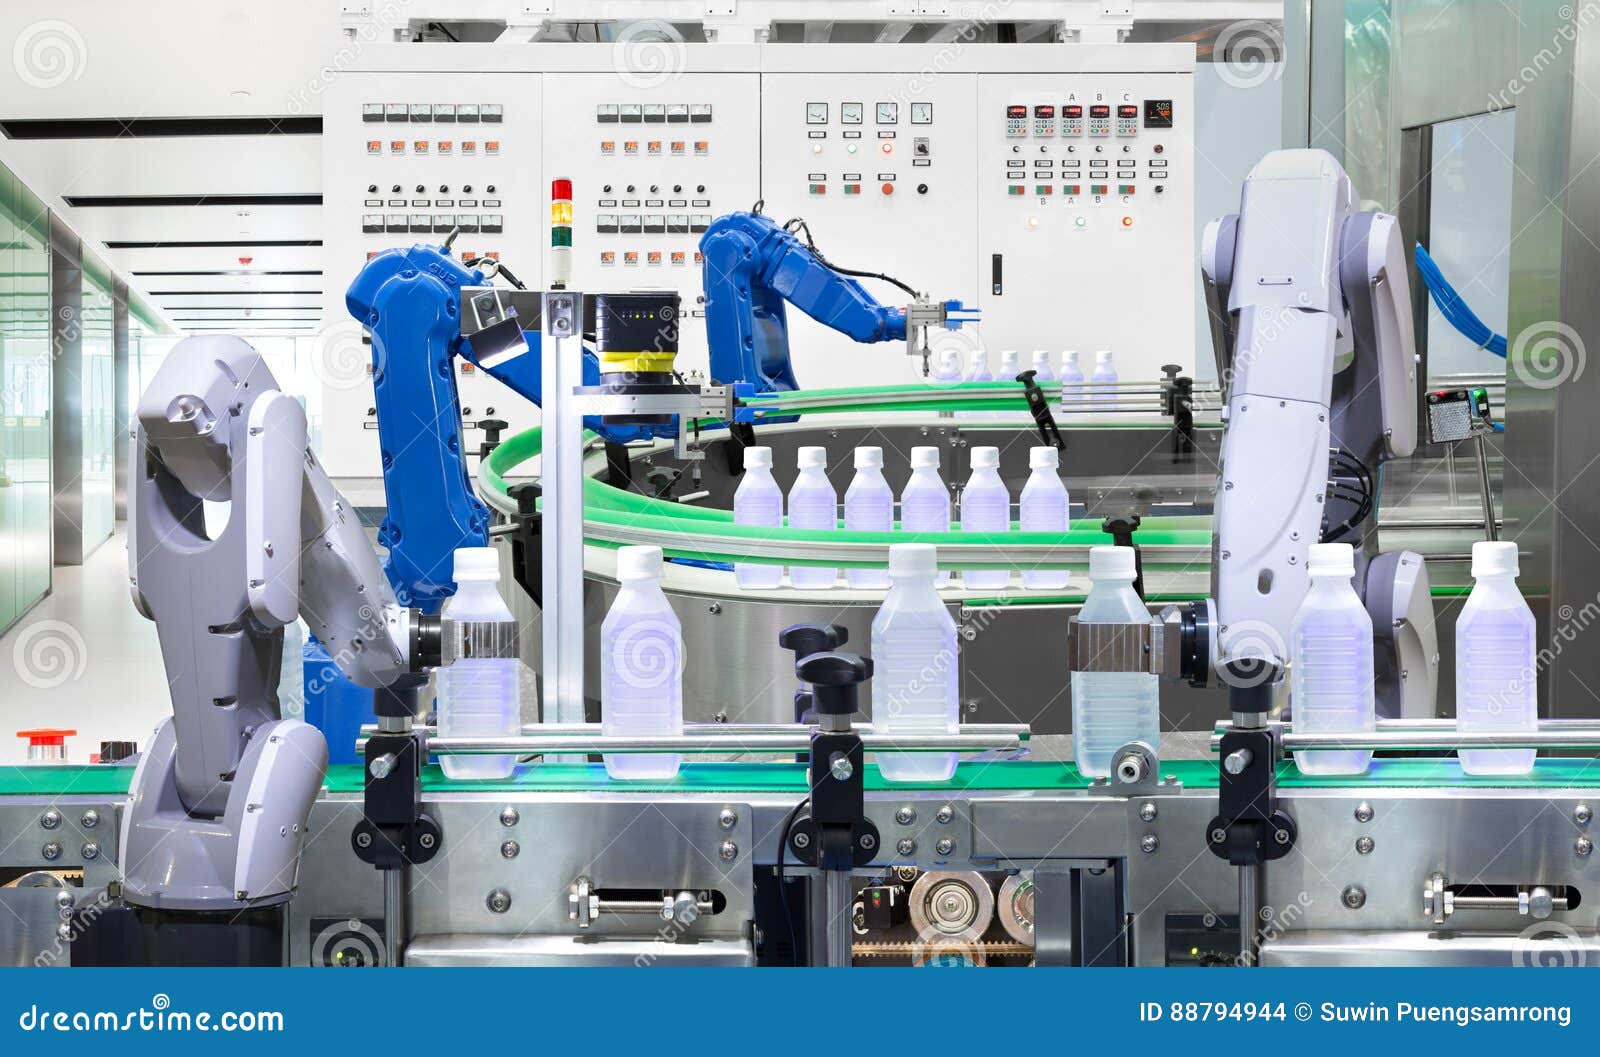 robotic arm holding water bottles on production line in factory, industry 4.0 concept